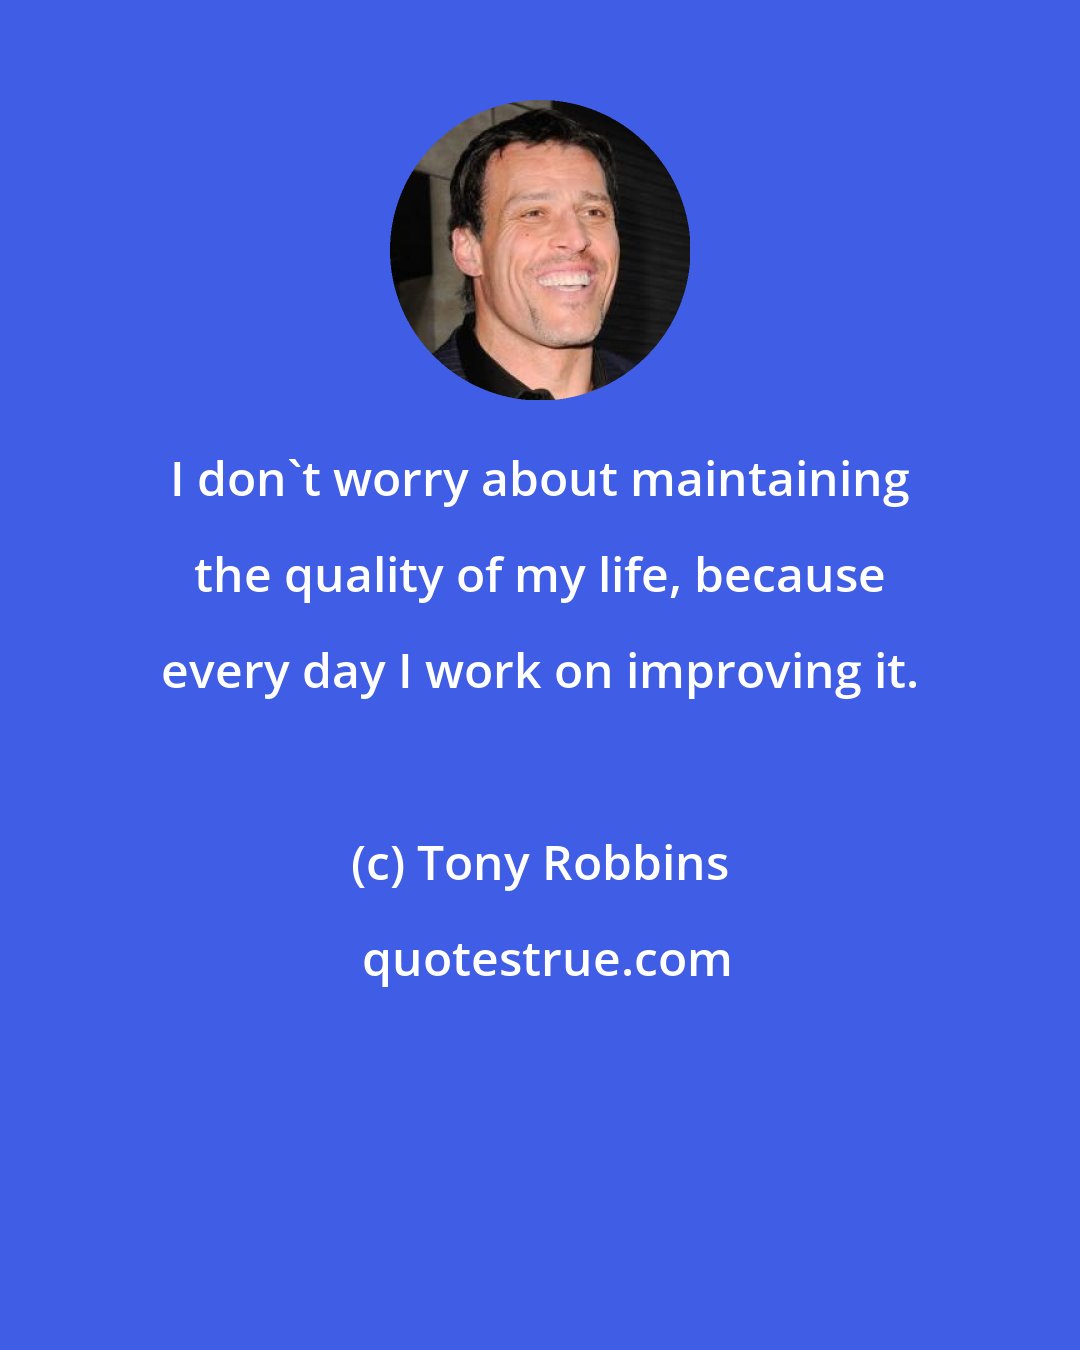 Tony Robbins: I don't worry about maintaining the quality of my life, because every day I work on improving it.